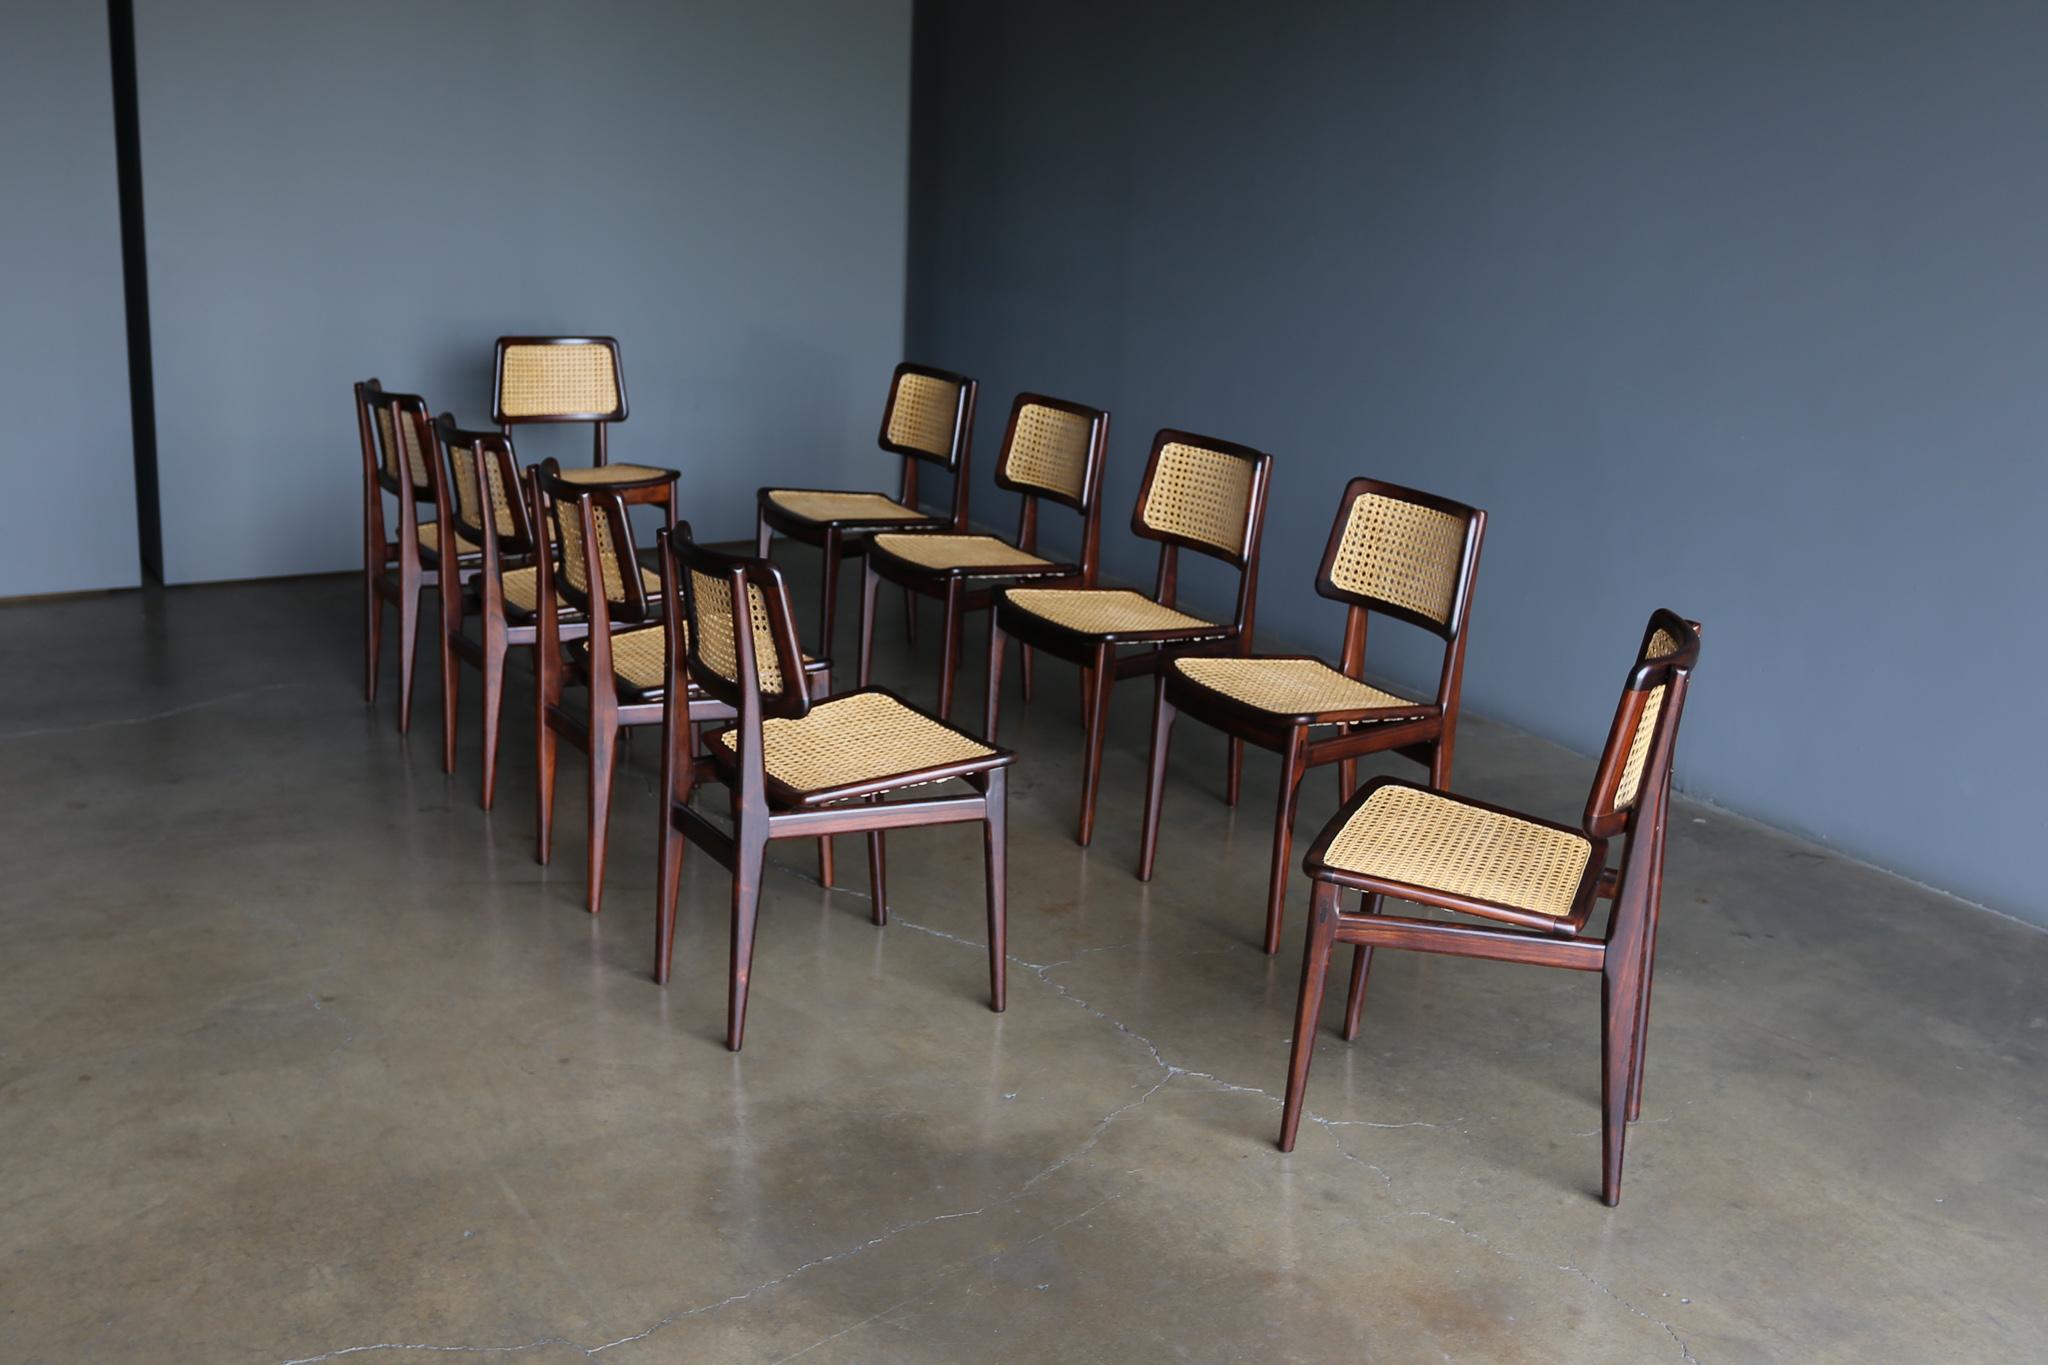 Carlo Hauner & Martin Eisler set of 10 dining chairs for FORMA, Brazil, 1952 - 1958. Highly figured Solid cabiúna wood with natural cane. This set has been expertly restored.